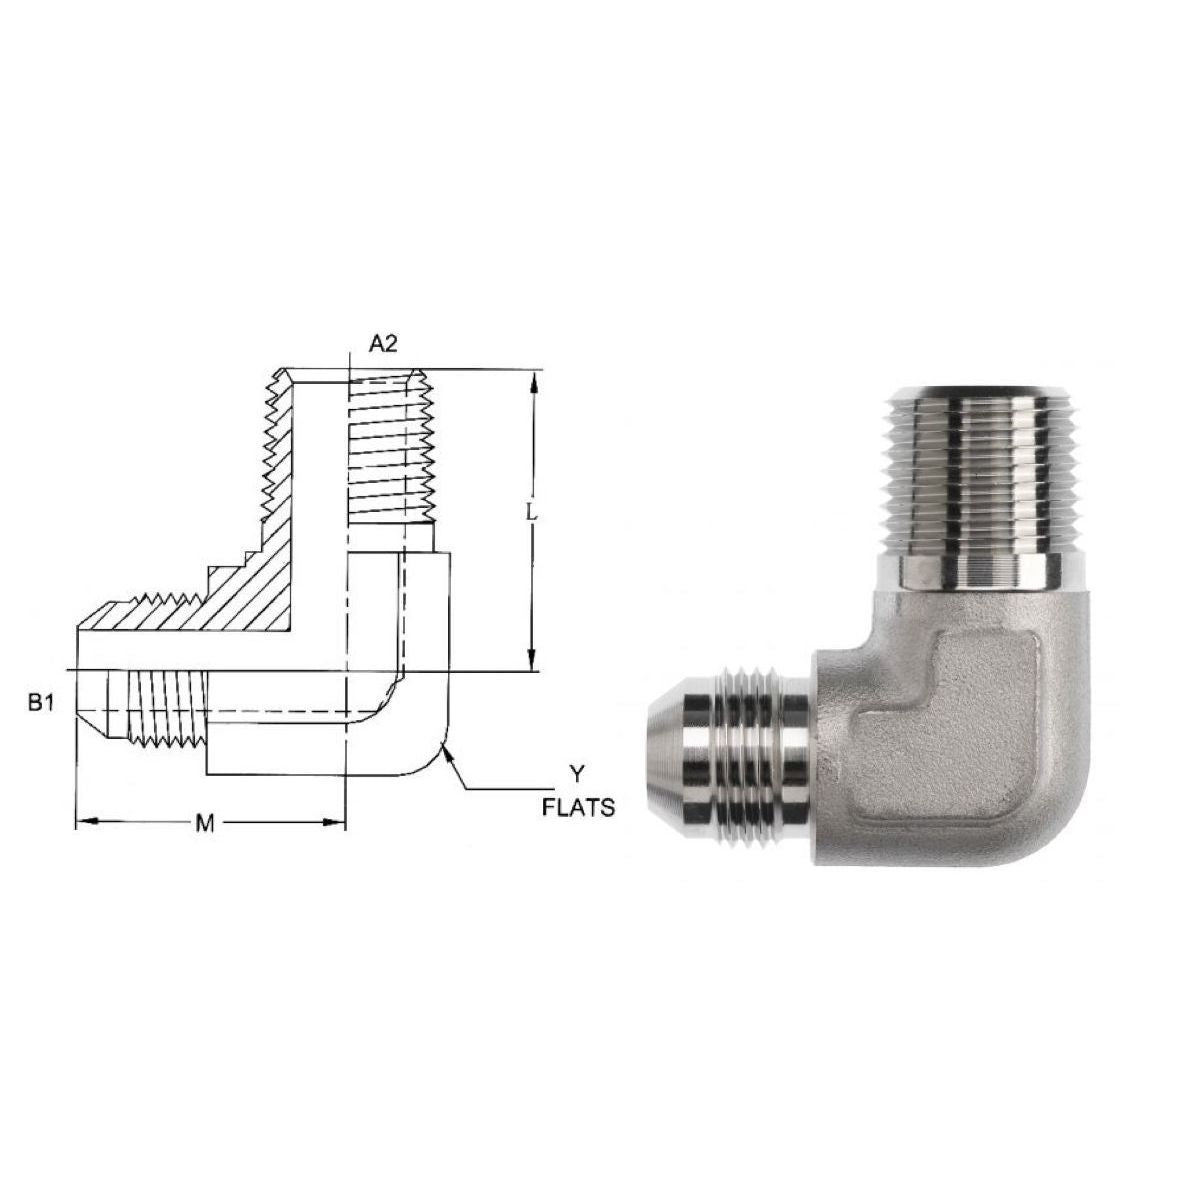 2501-05-02-SS : OneHydraulics 90-Degree Elbow, 0.3125 (5/16) Male JIC x 0.125 (1/8) Male NPT, Stainless Steel, 7200psi